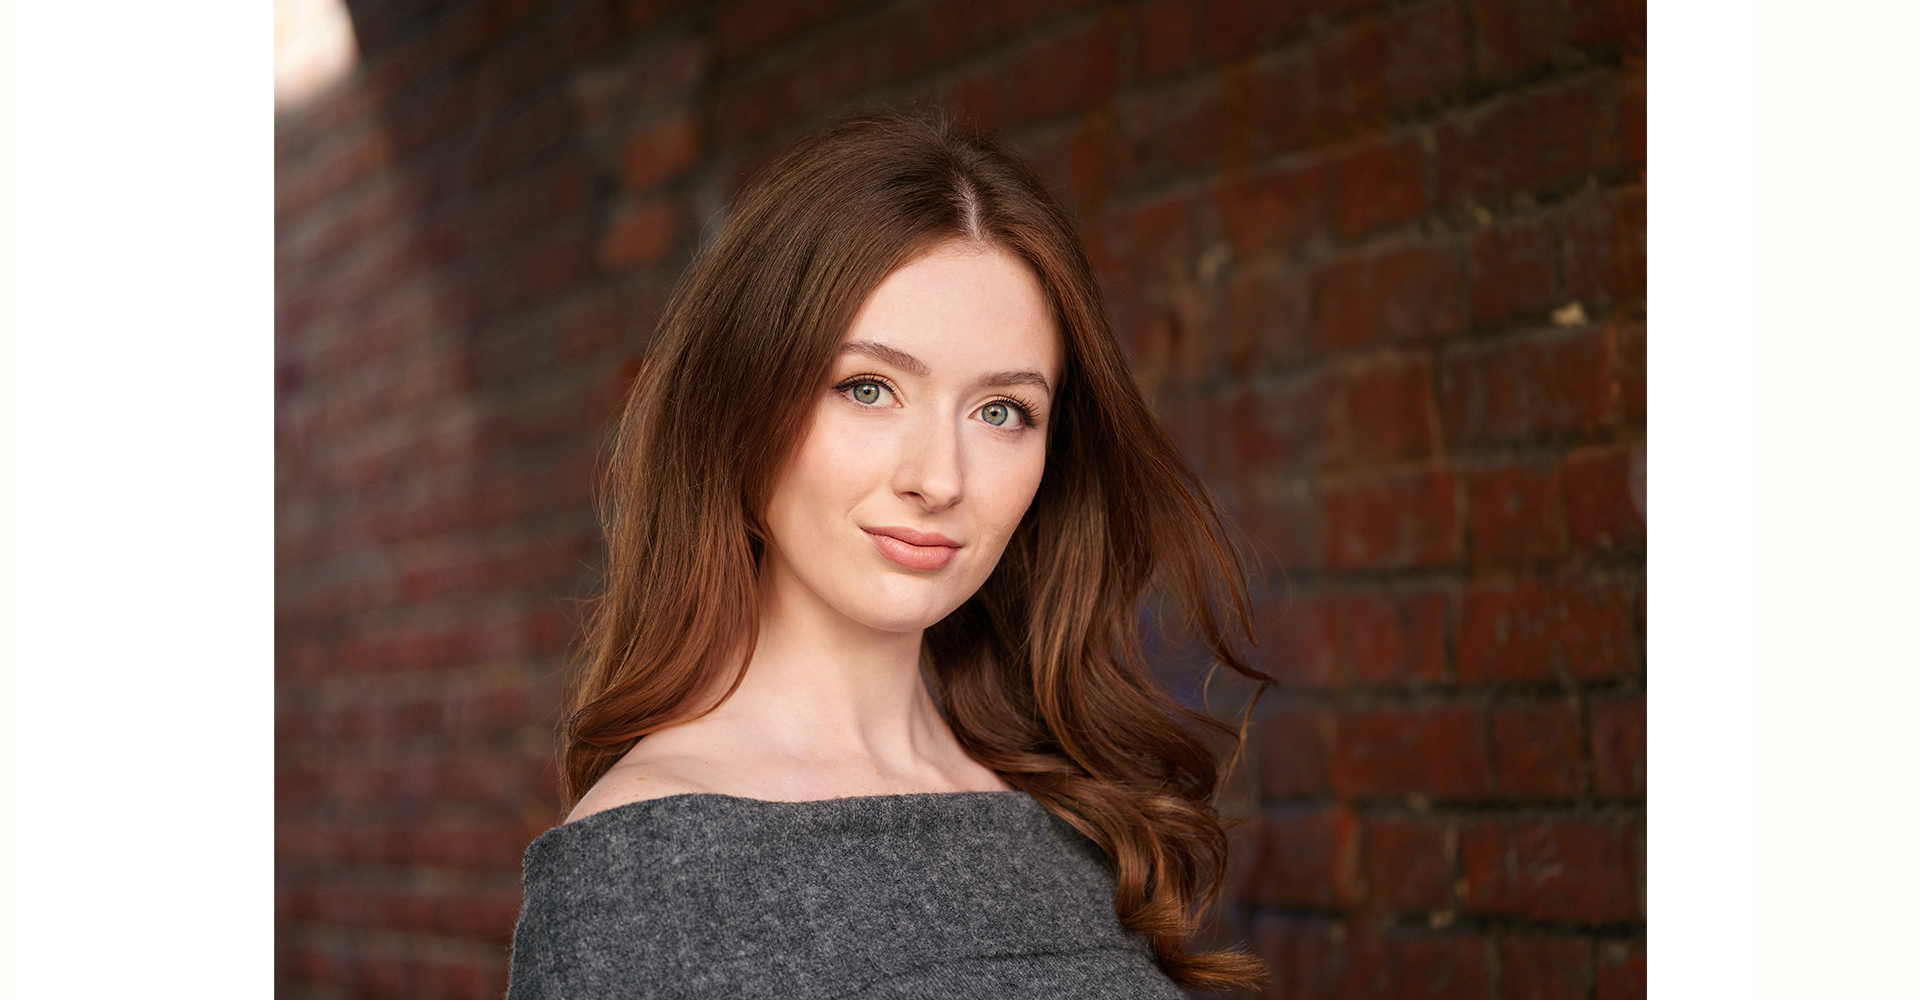 Red hair actress side on front of brick wall in natural light